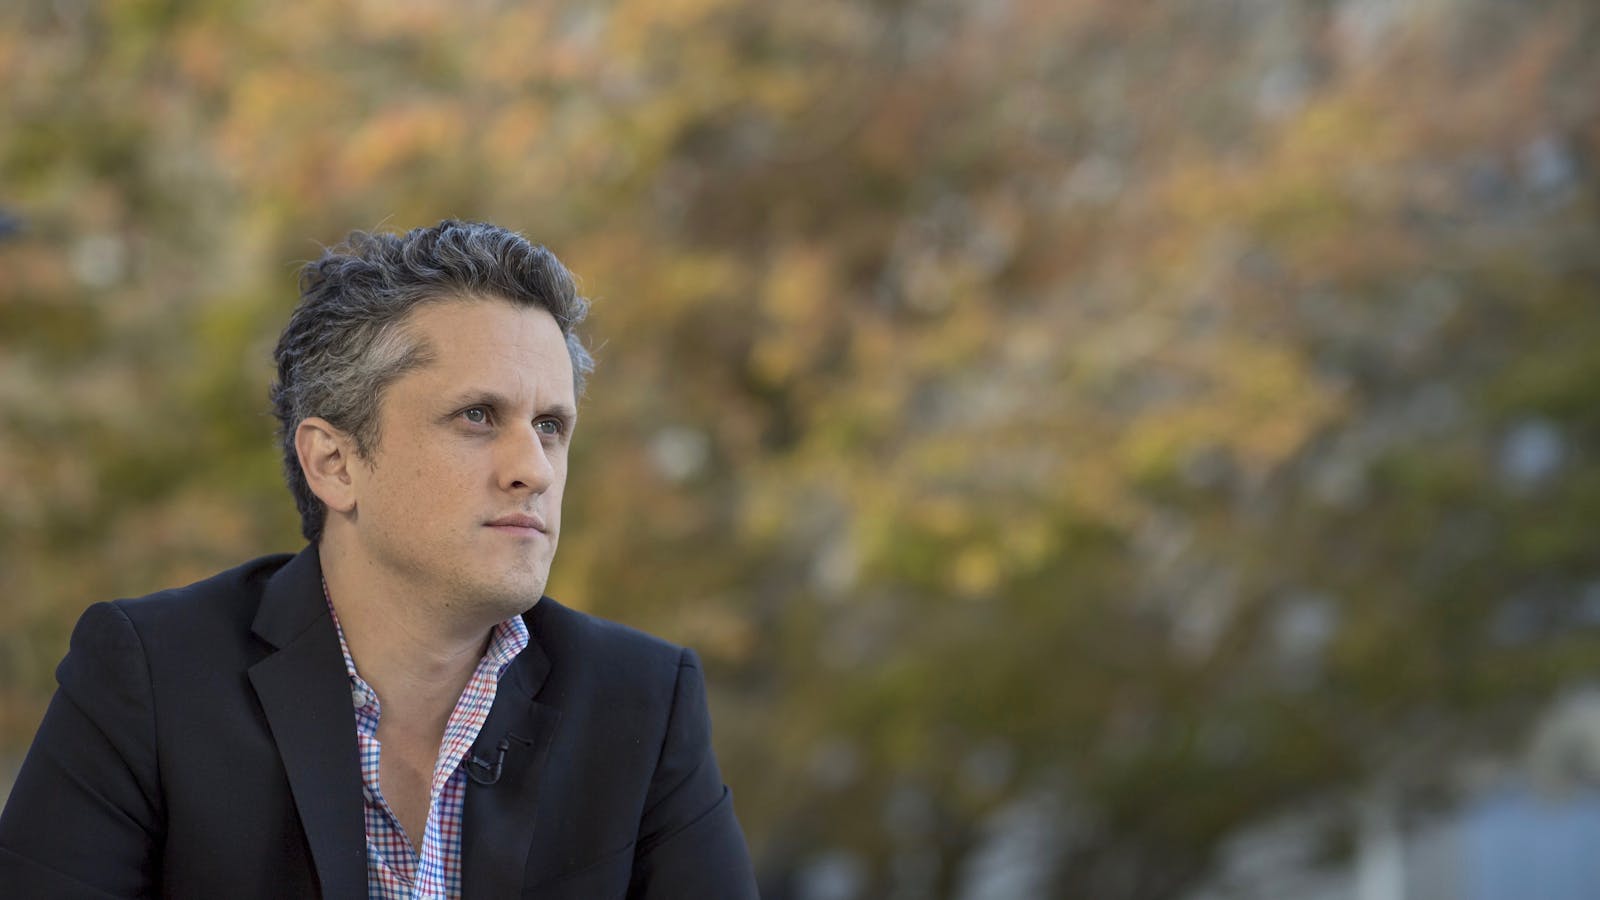 Box CEO Aaron Levie. Photo by Bloomberg.